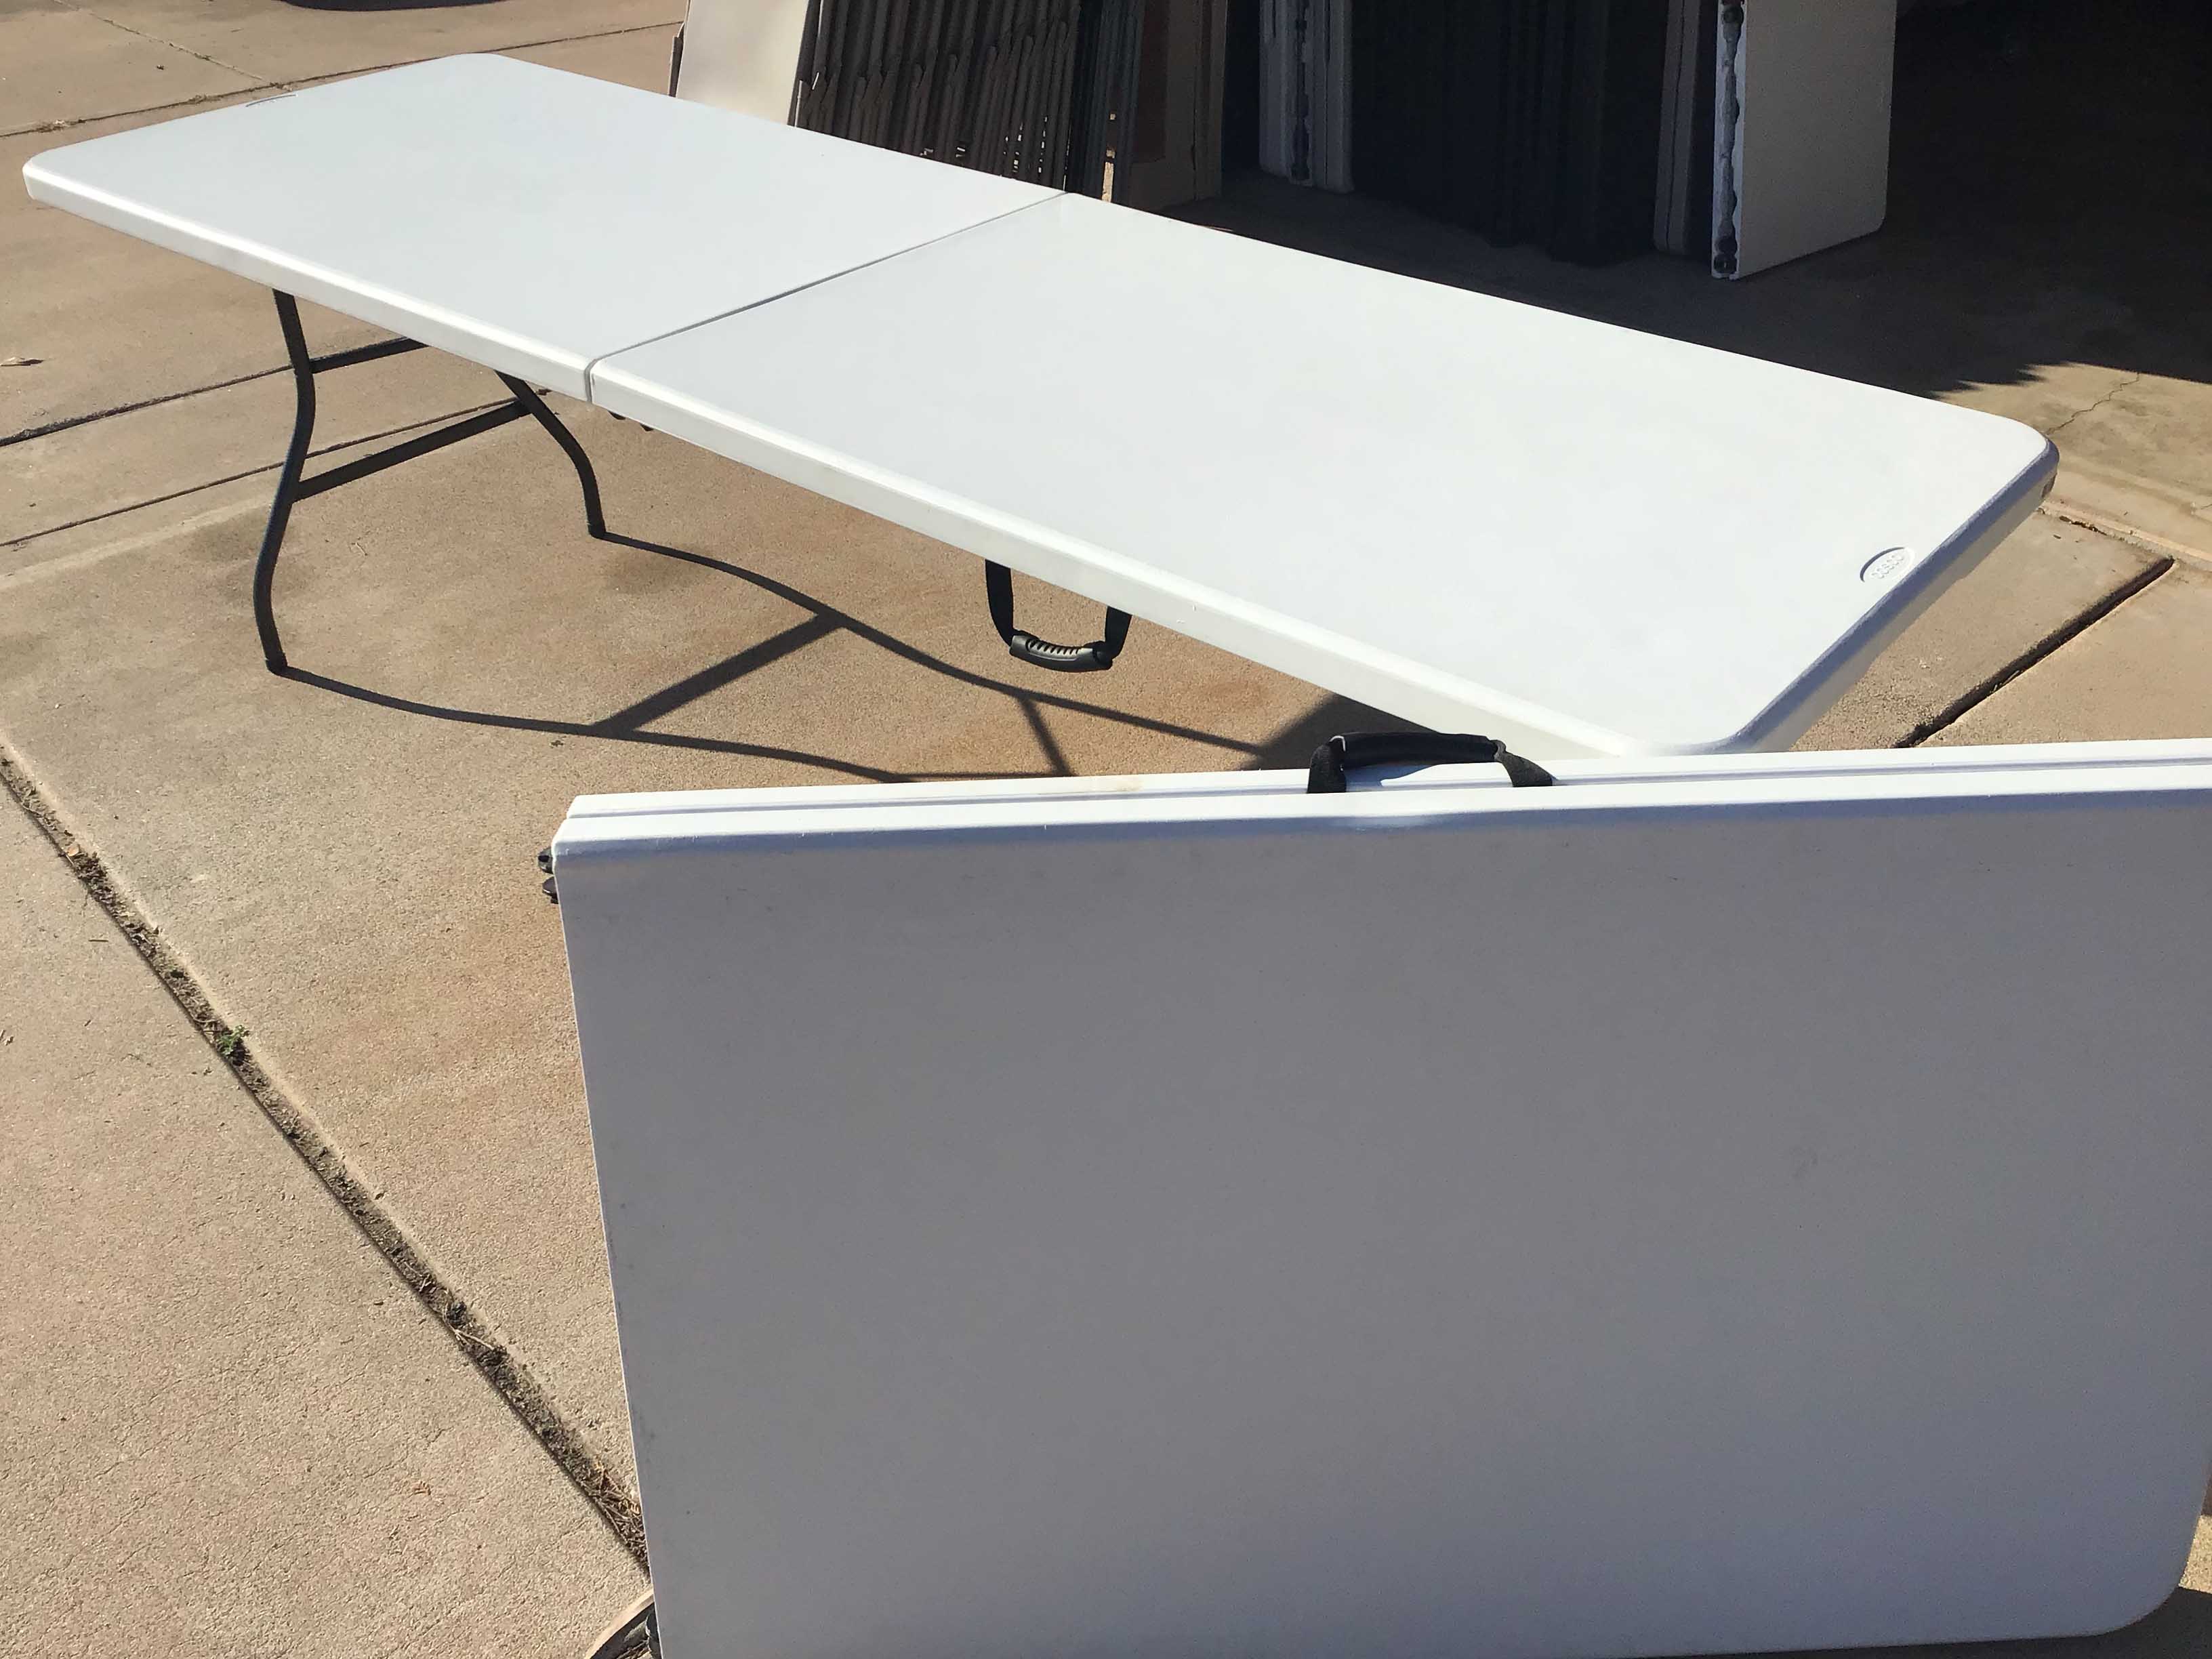 8 foot rectangle tables